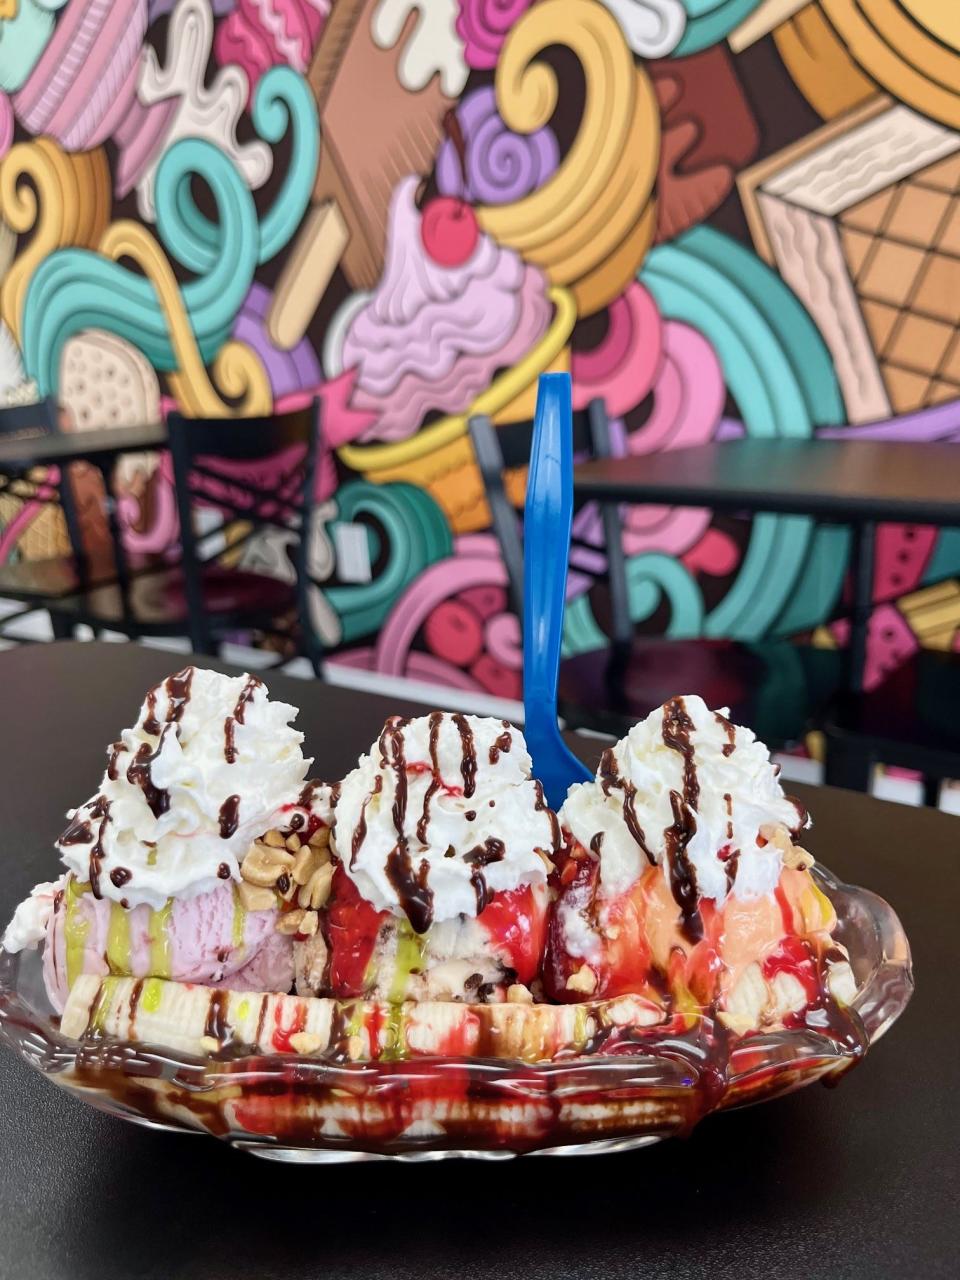 Get creative with flavor combinations in your banana split at Ice Sssscreamin' in Cape Coral.